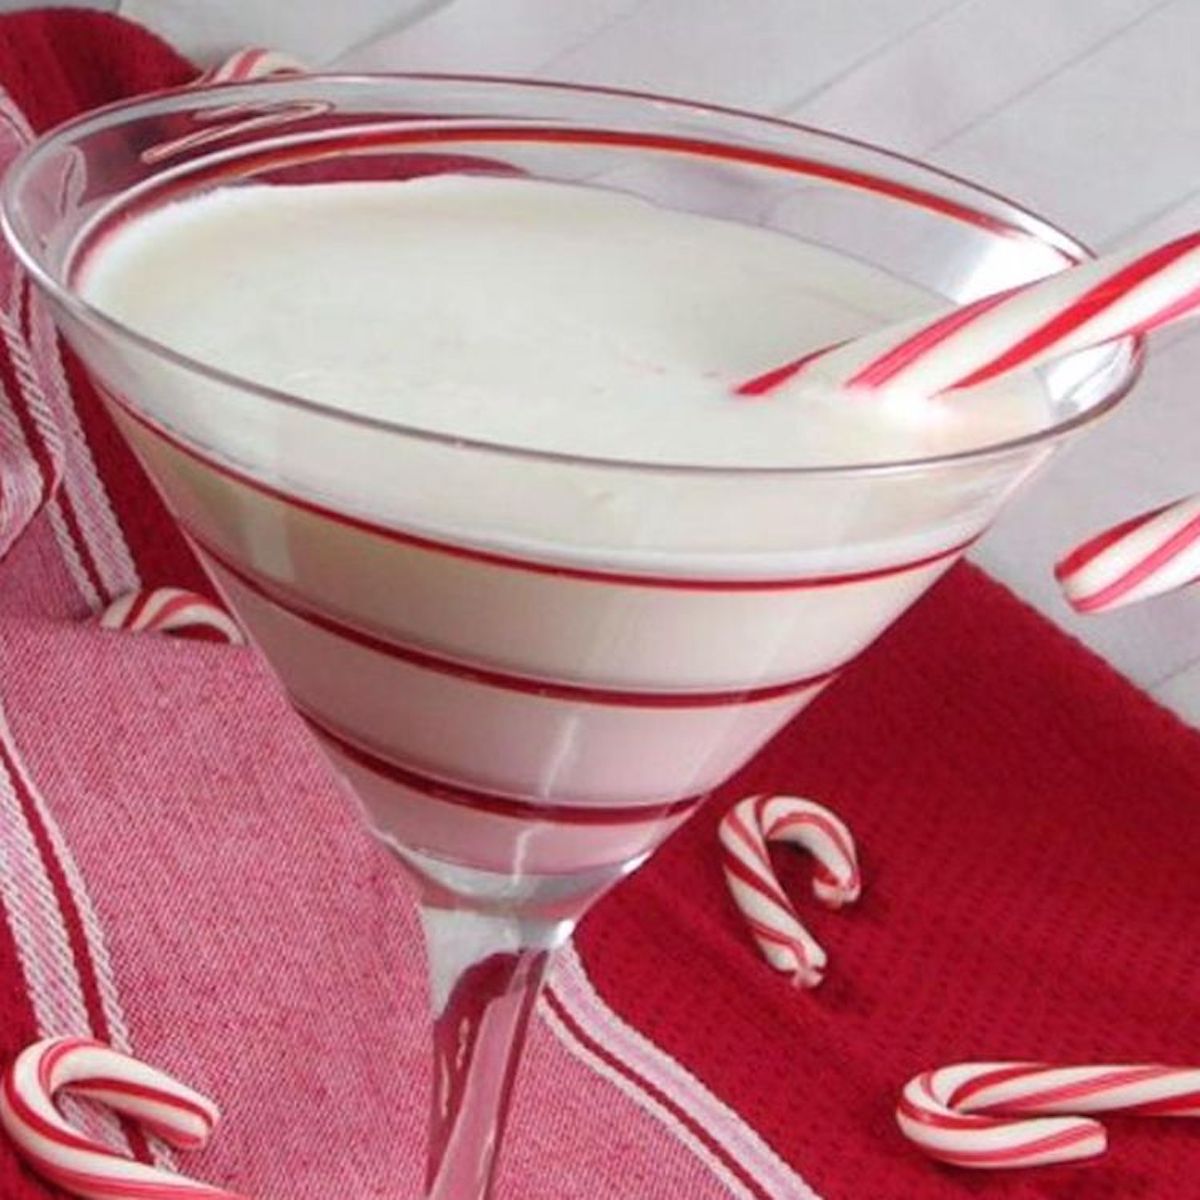 8 Recipes Featuring Christmas Candy Canes For The Festive Season